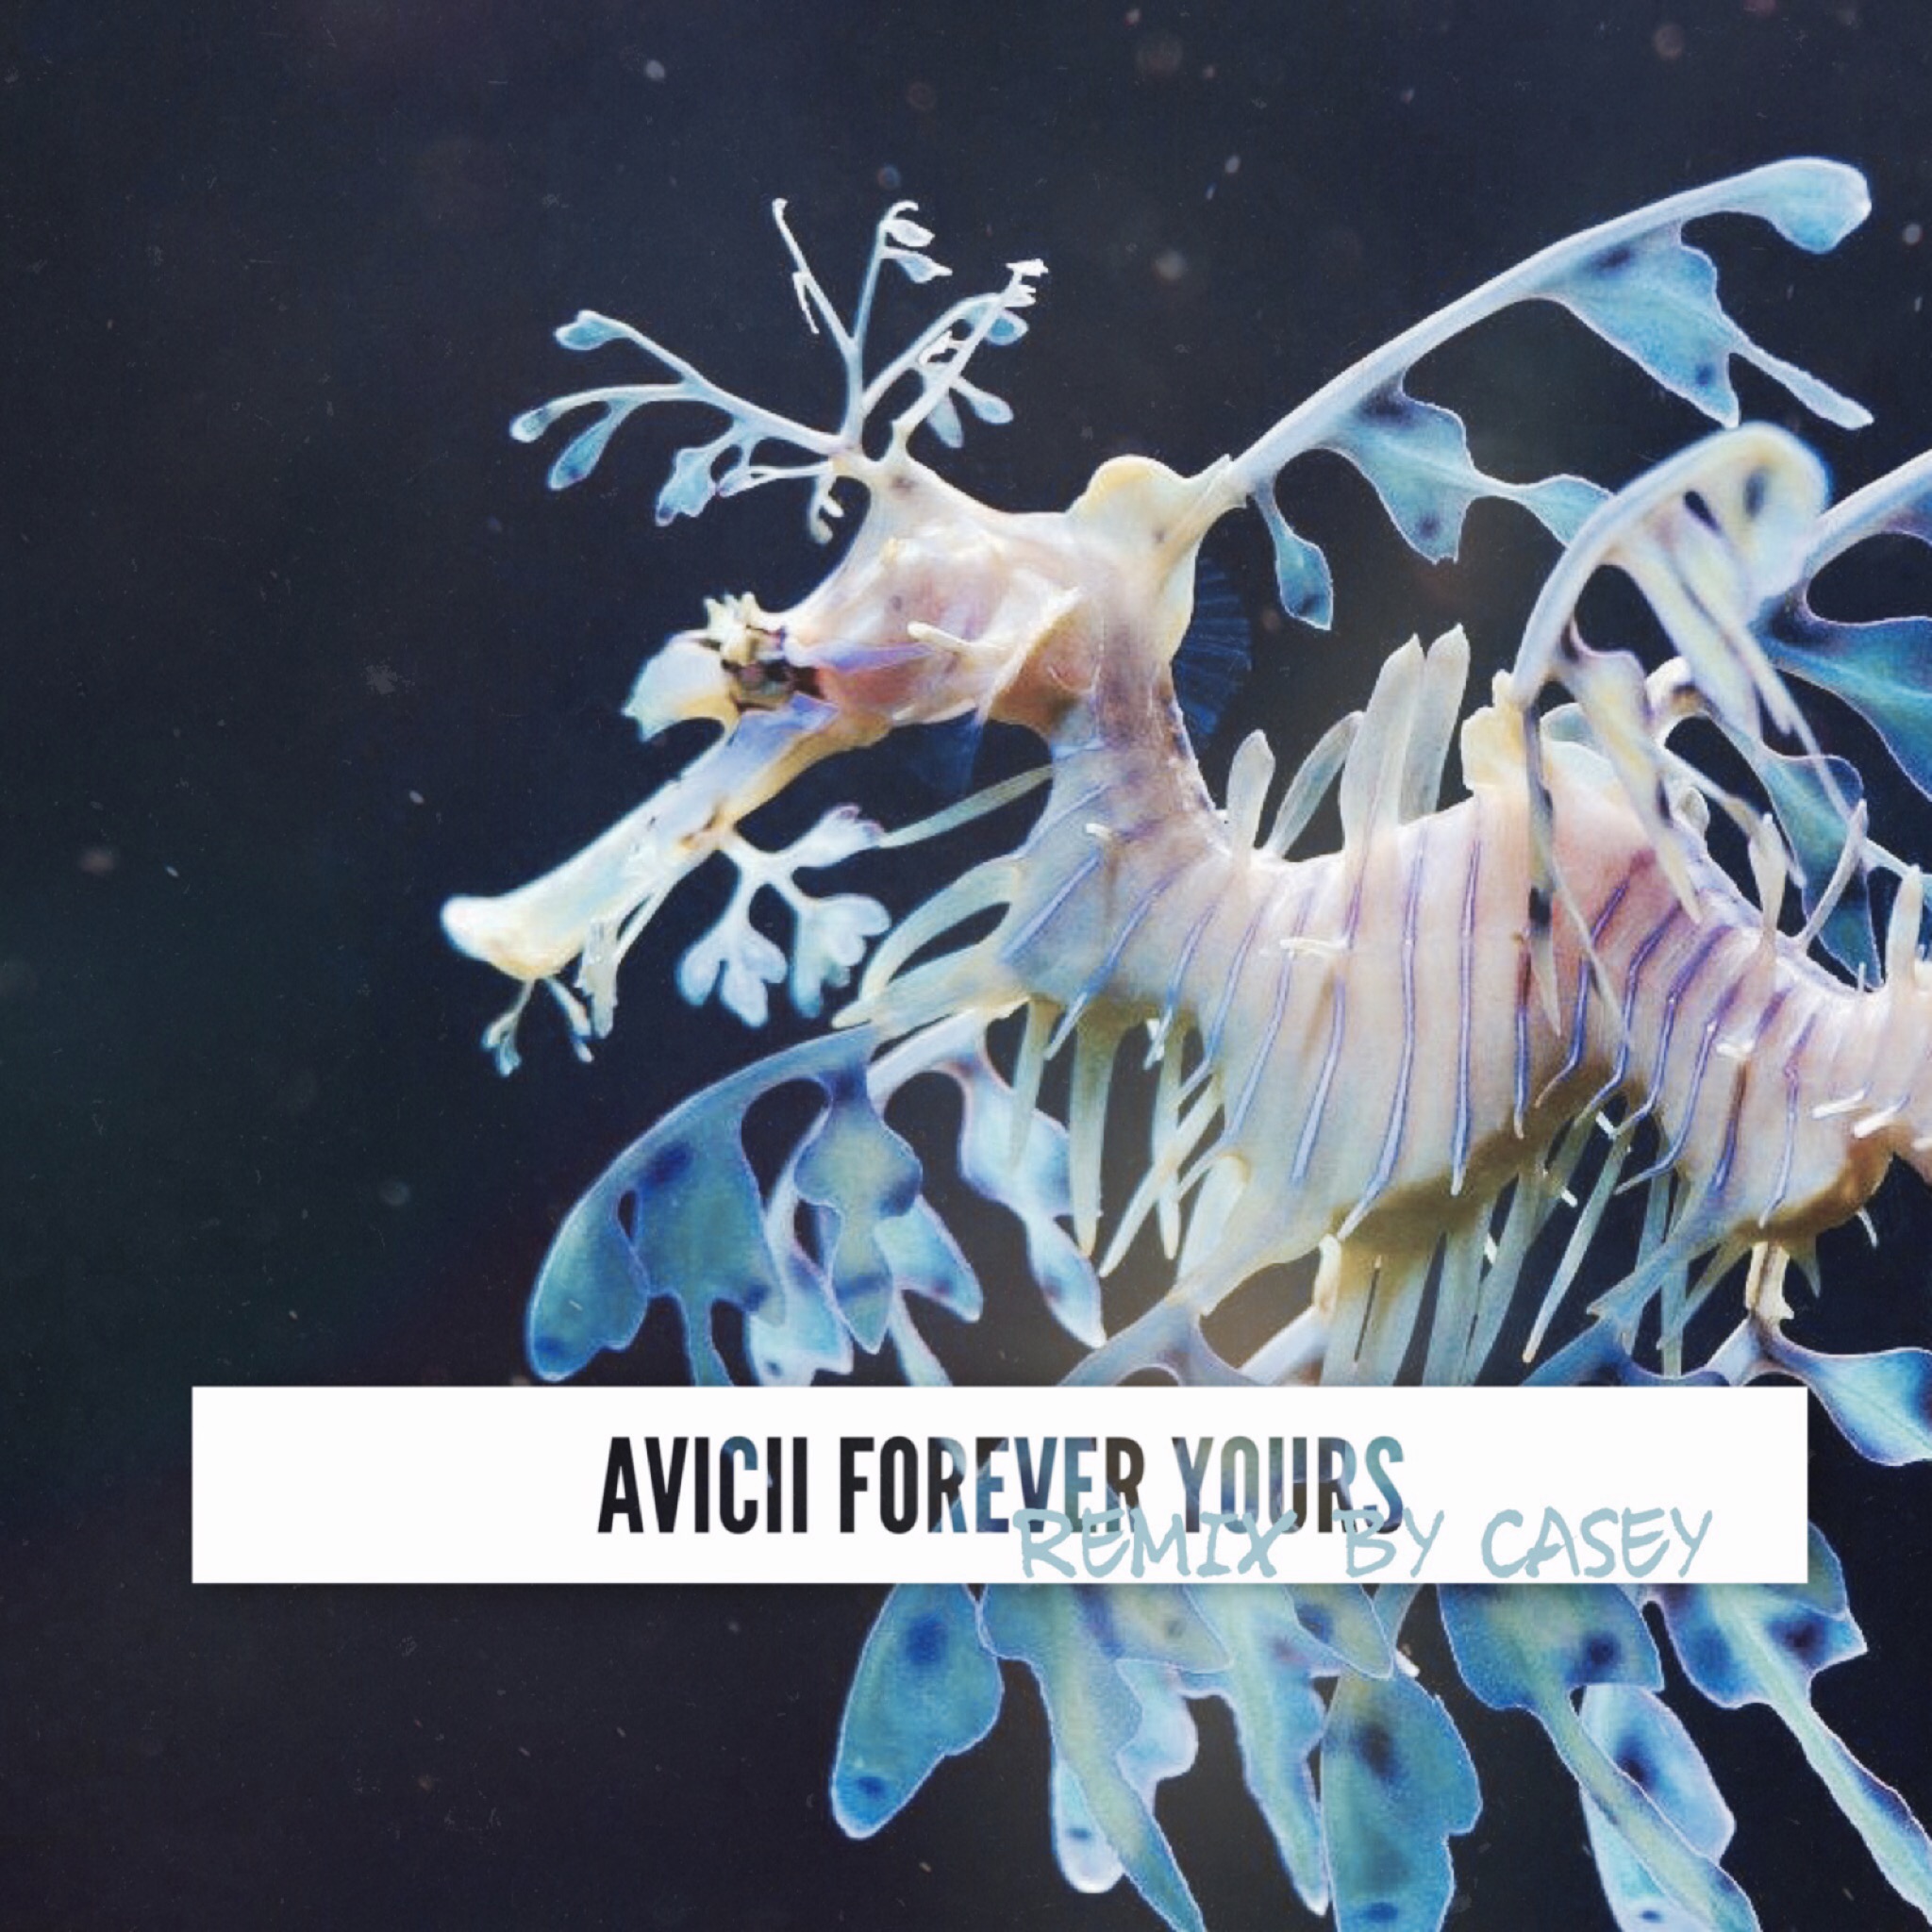 AVICII Forever Yours-Remix by casey